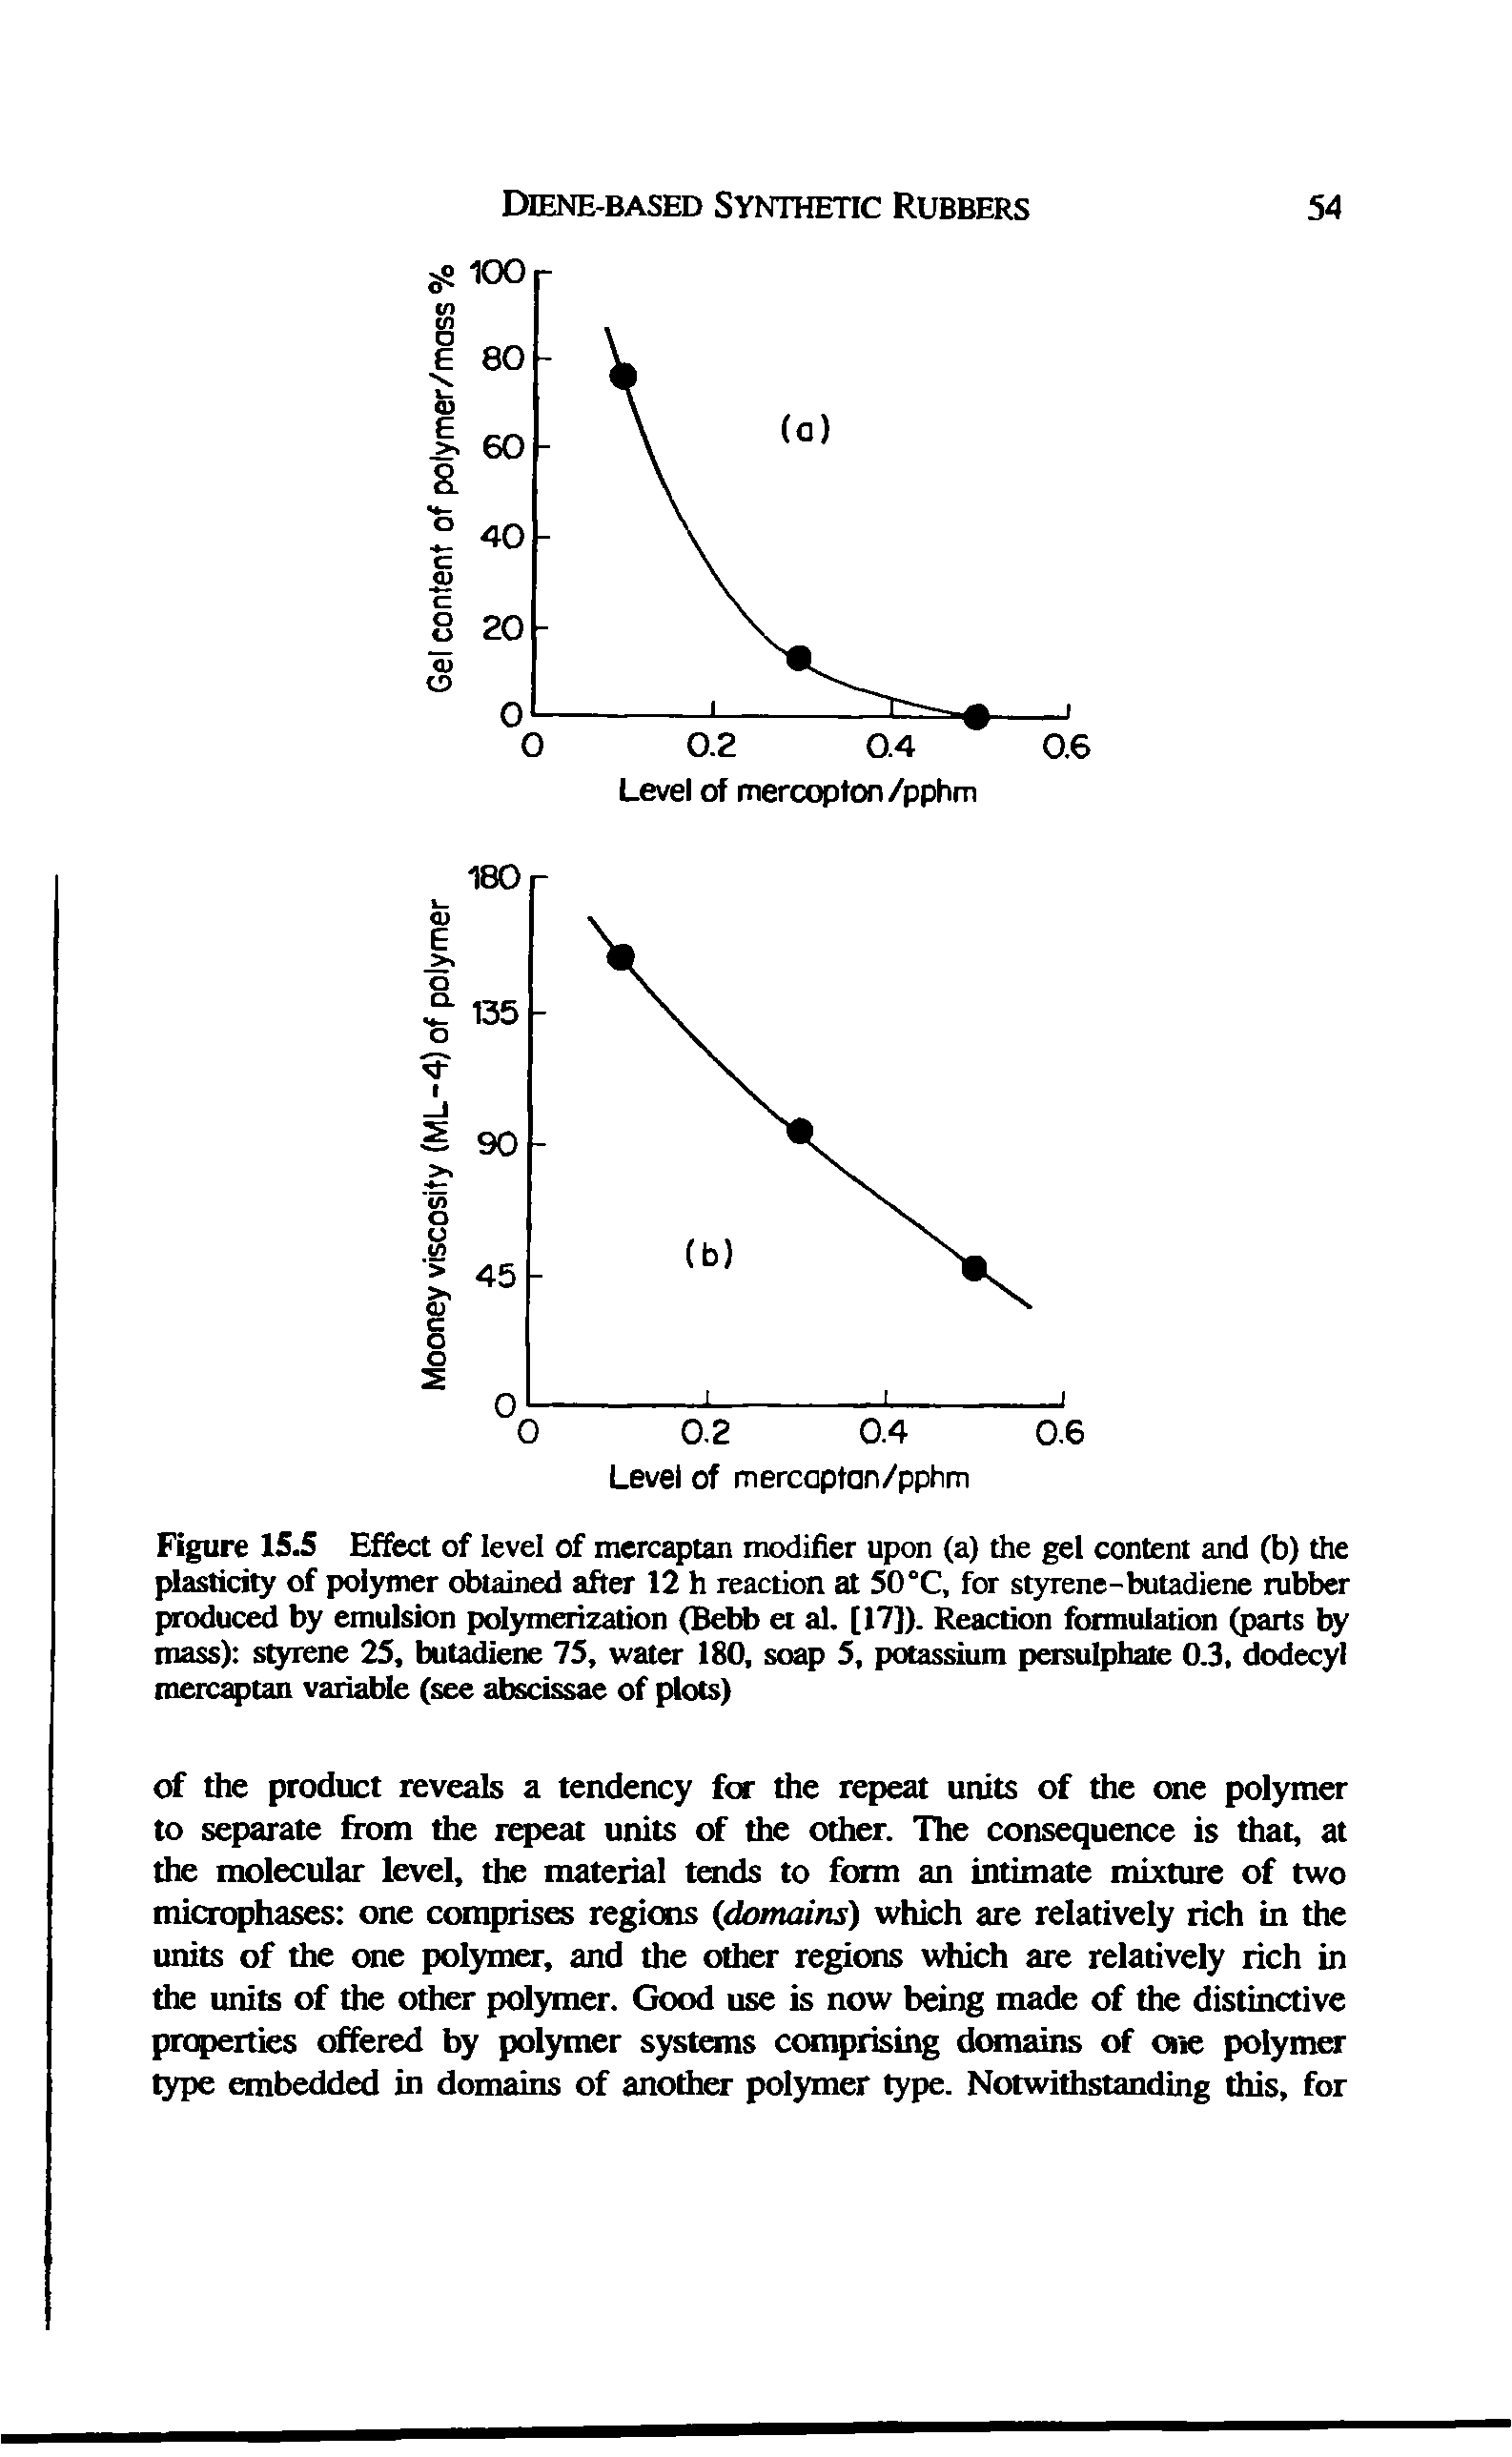 Figure 15.5 Effect of level of merci tan modifier upon (a) the gel content and (b) the plasticity of polymer obtained after 12 h reaction at SO°C, for styrene-butadiene rubber produced by emulsion pcdymraizafion (Bebb et al. [17]). Reaction foimulatitHi (parts mass) sonene 25, buta ne 75, water 180, soq> 5, potassium posulphaie OJ, dodecyl mercaptan variable (see abscissae of plots)...